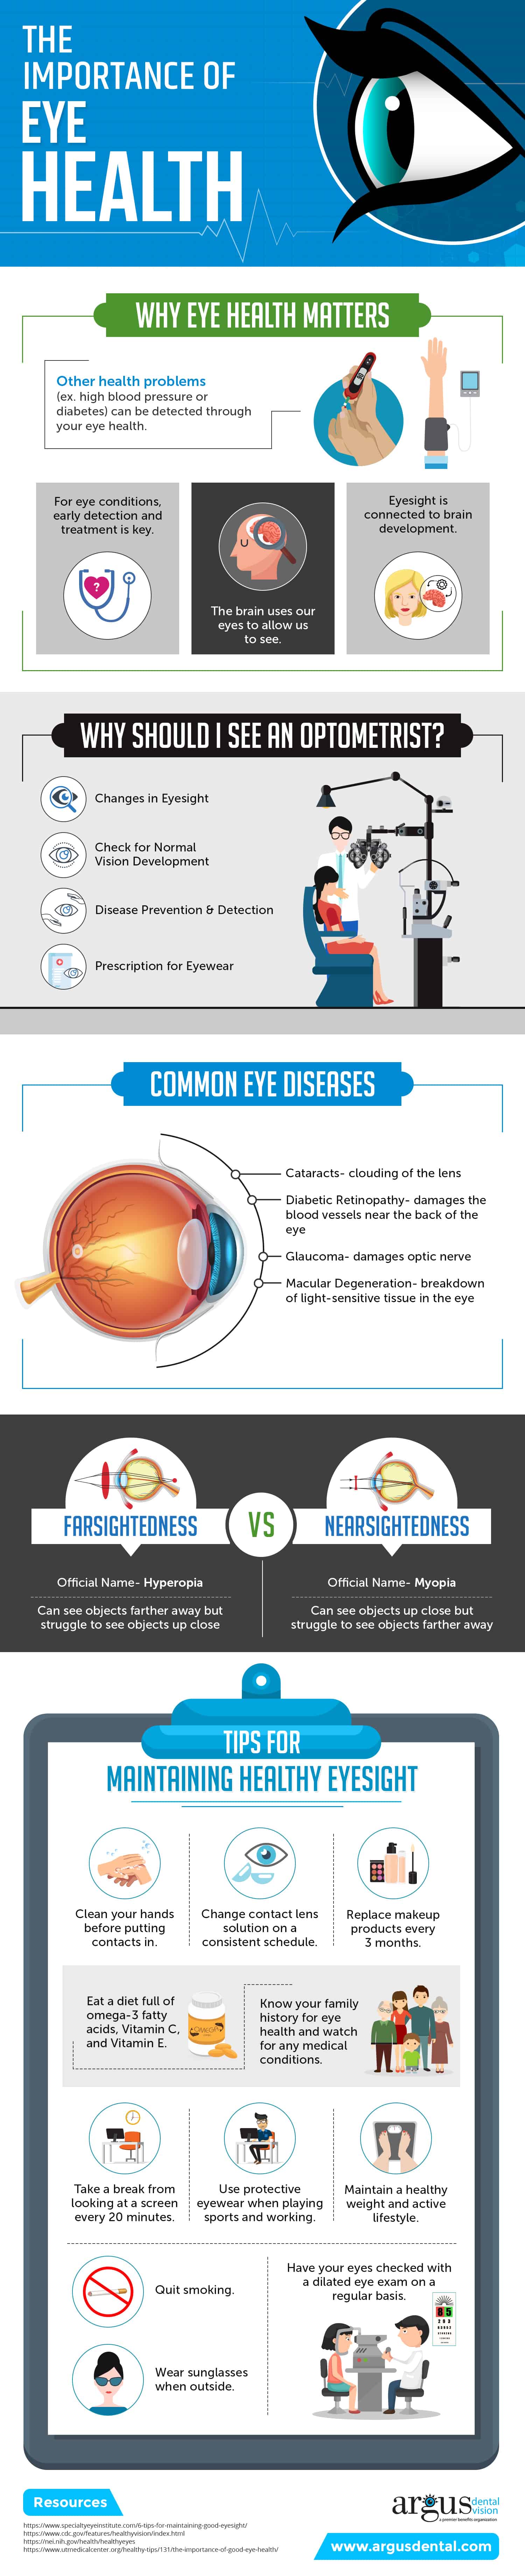 The Importance of Eye Health